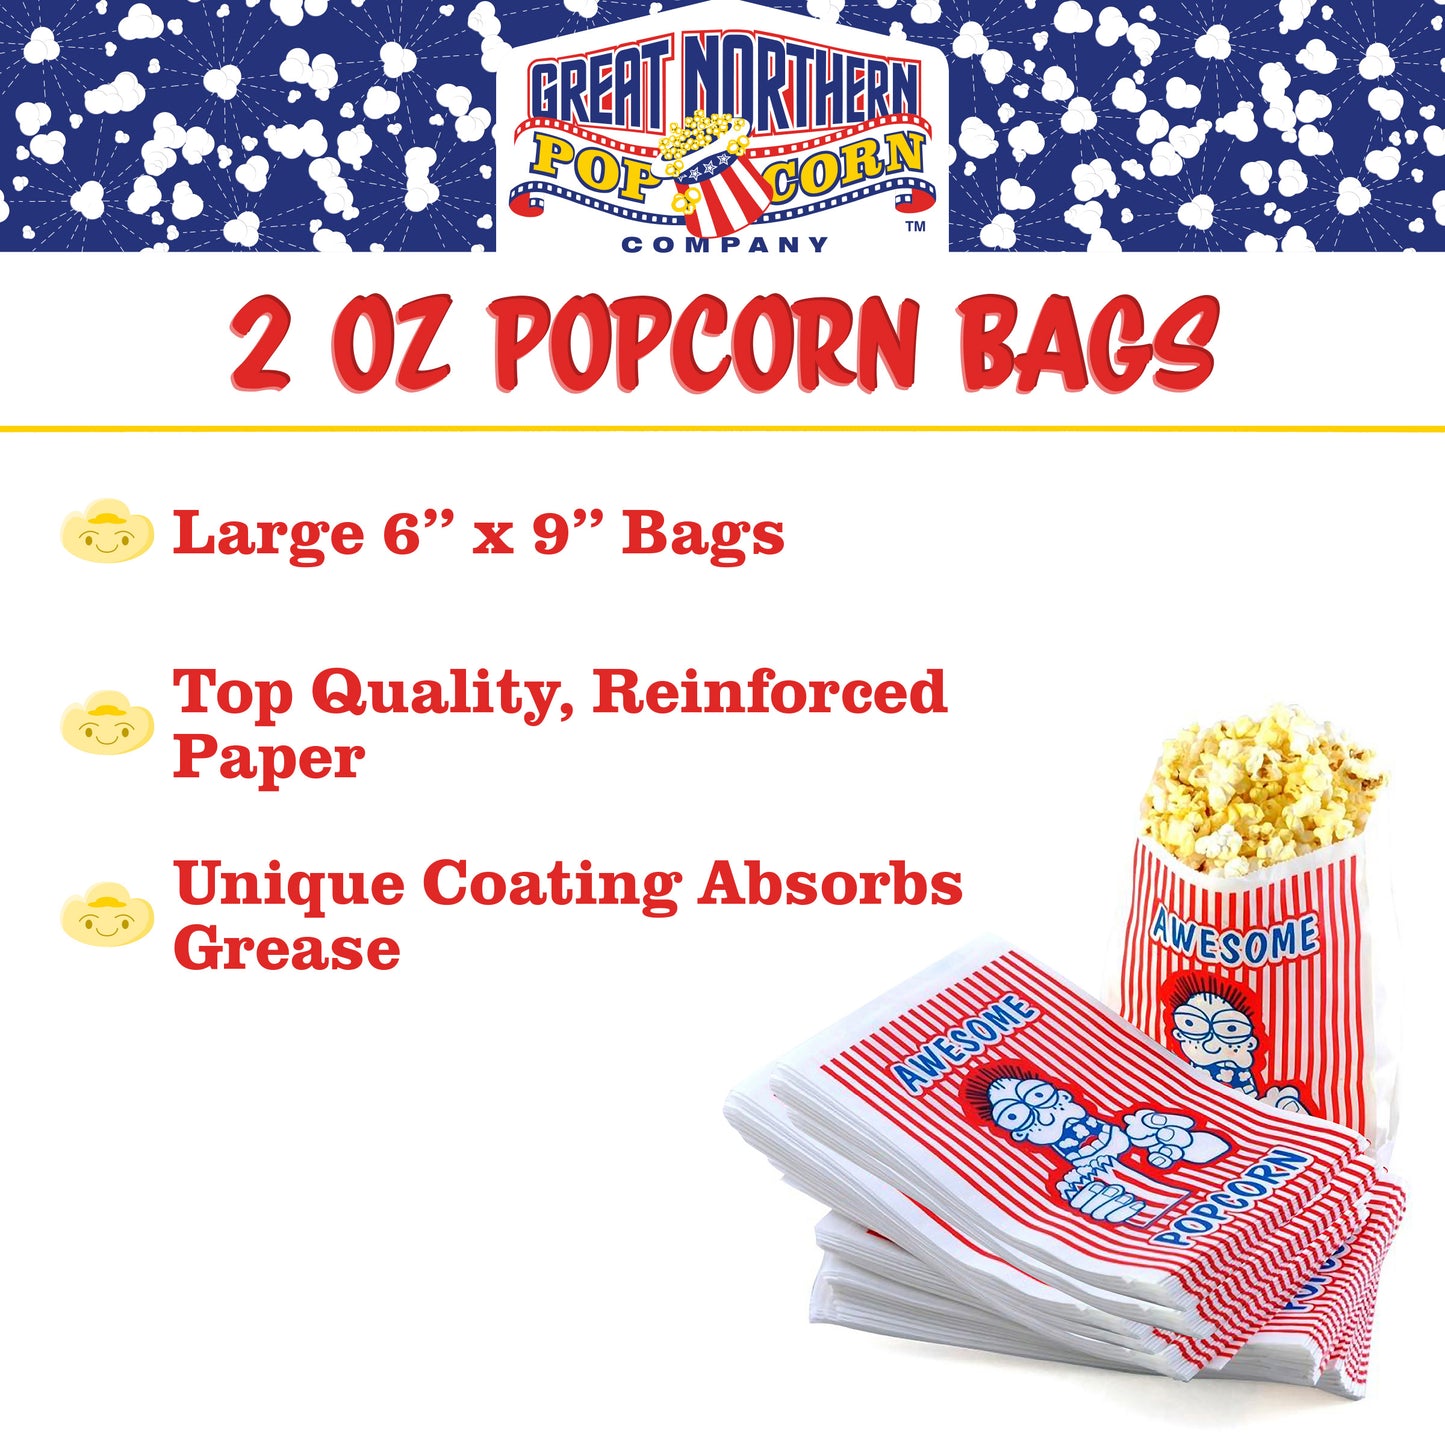 100 Popcorn Bags and 4 Ounce All-in-One Popcorn Packs  – Case of 24